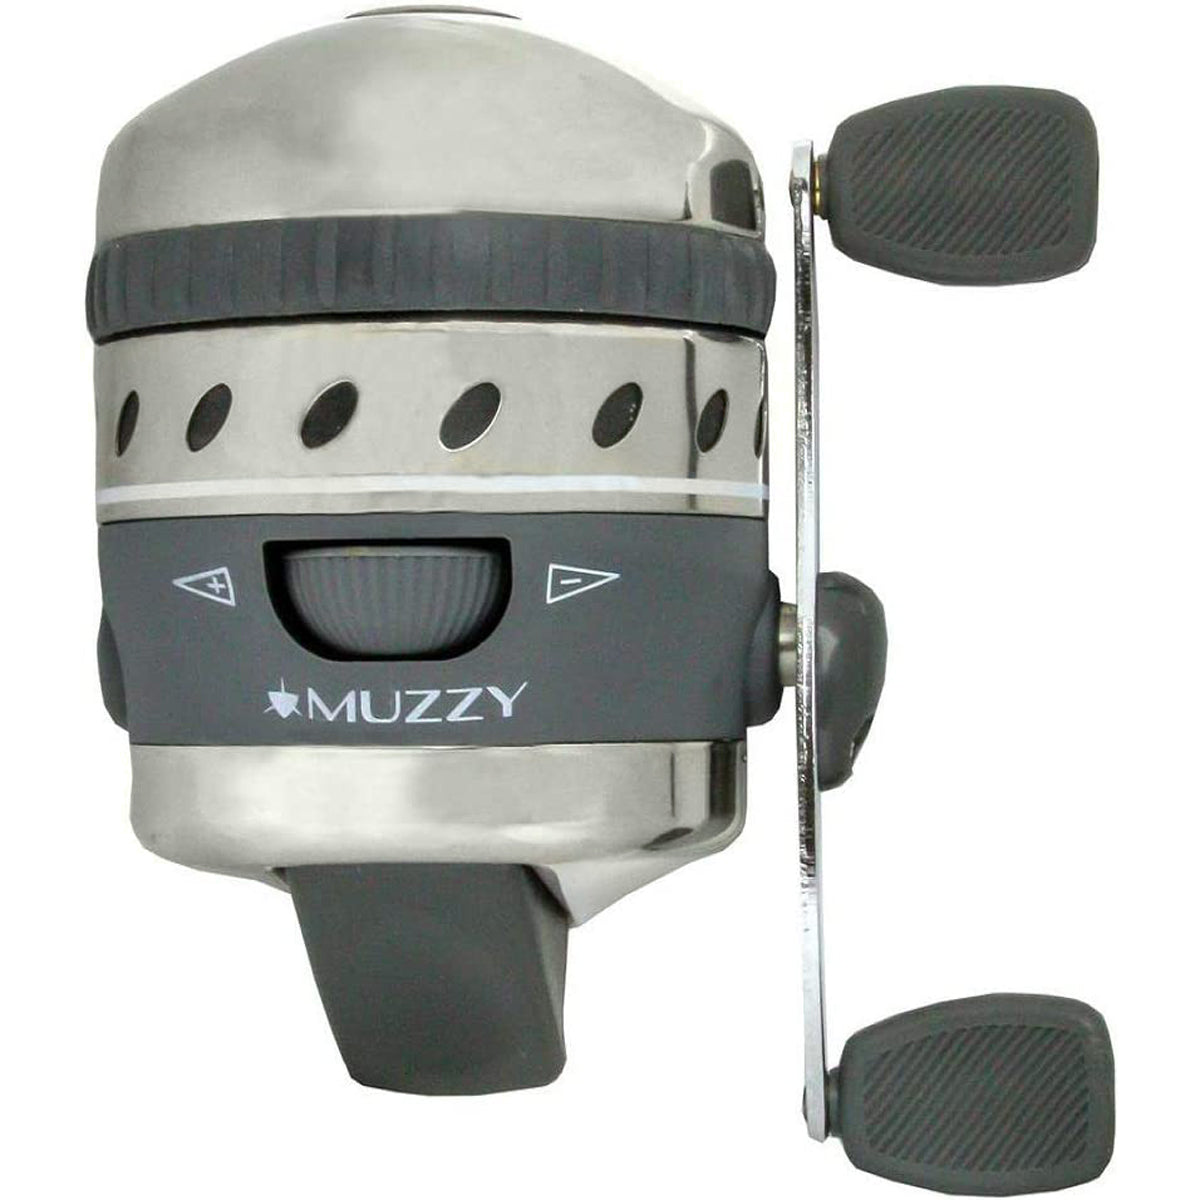 Muzzy XD Bowfishing  Spincast Reel with Extended Hood - 150 lb. Test Muzzy